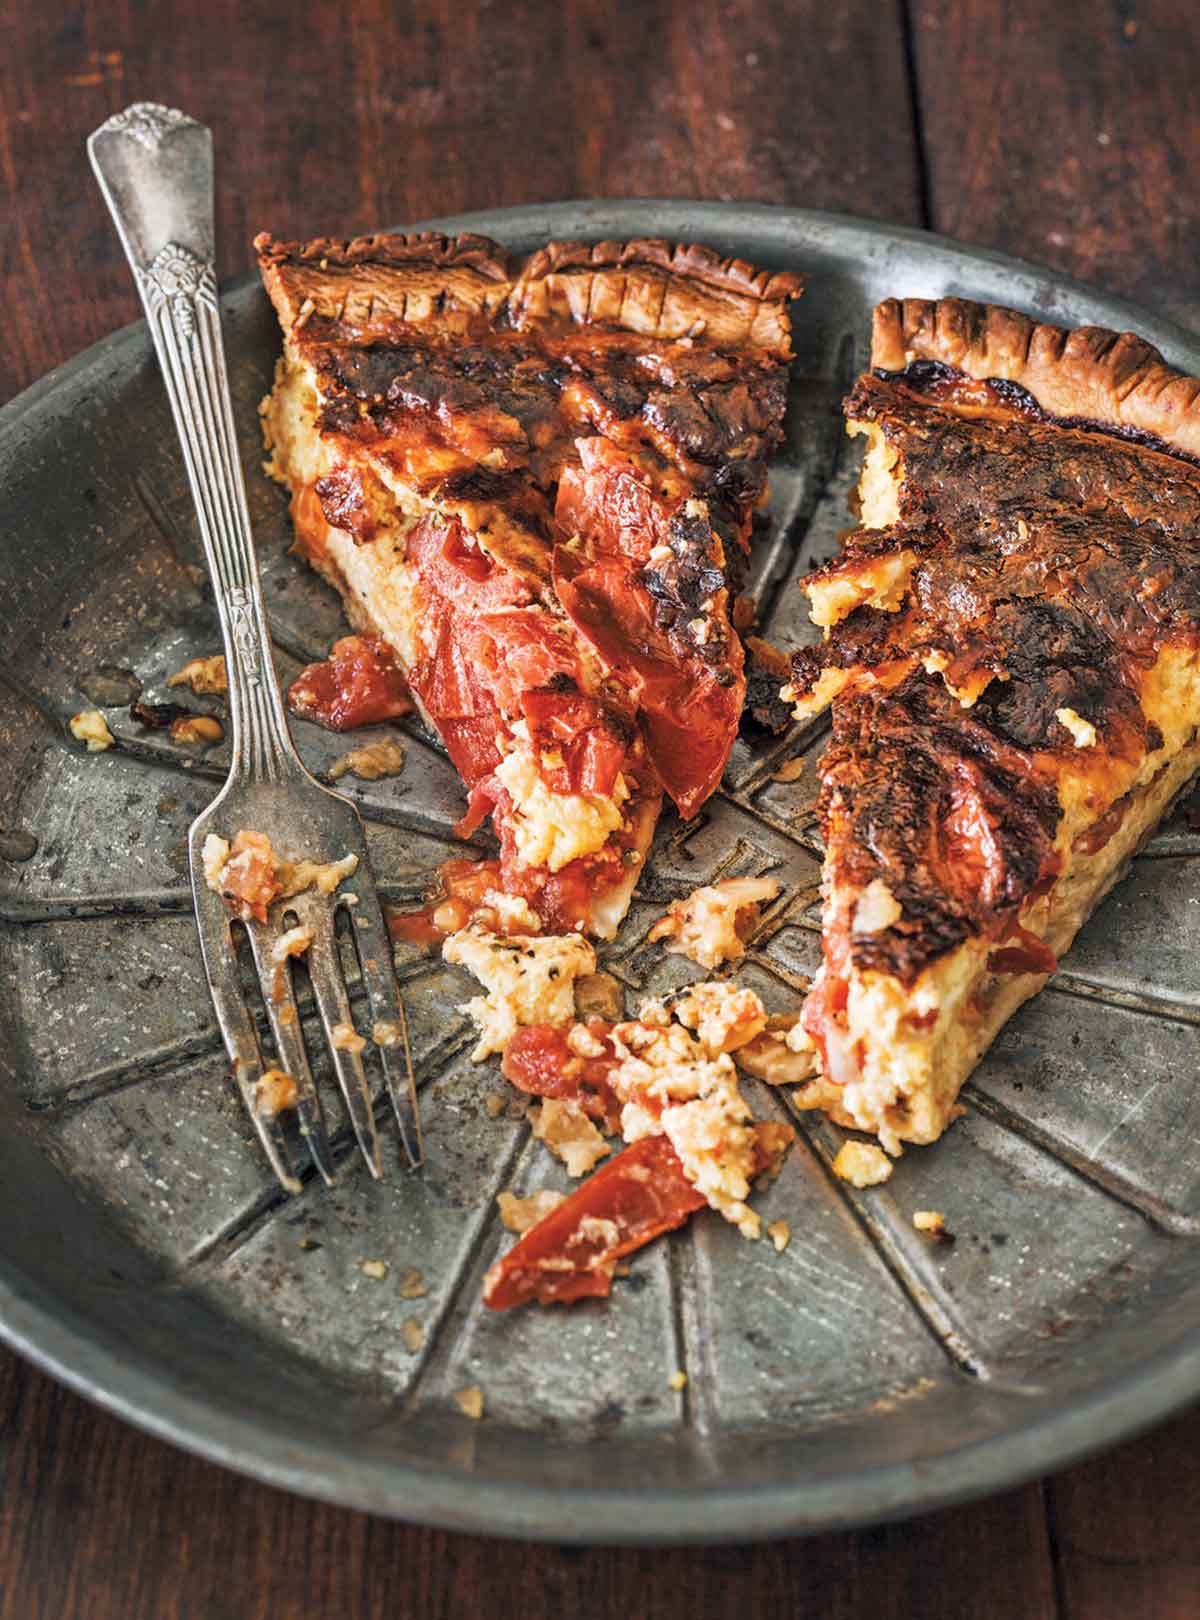 A metal pie plate with two slices of roasted tomato quiche, some crumbs of crust and a fork.